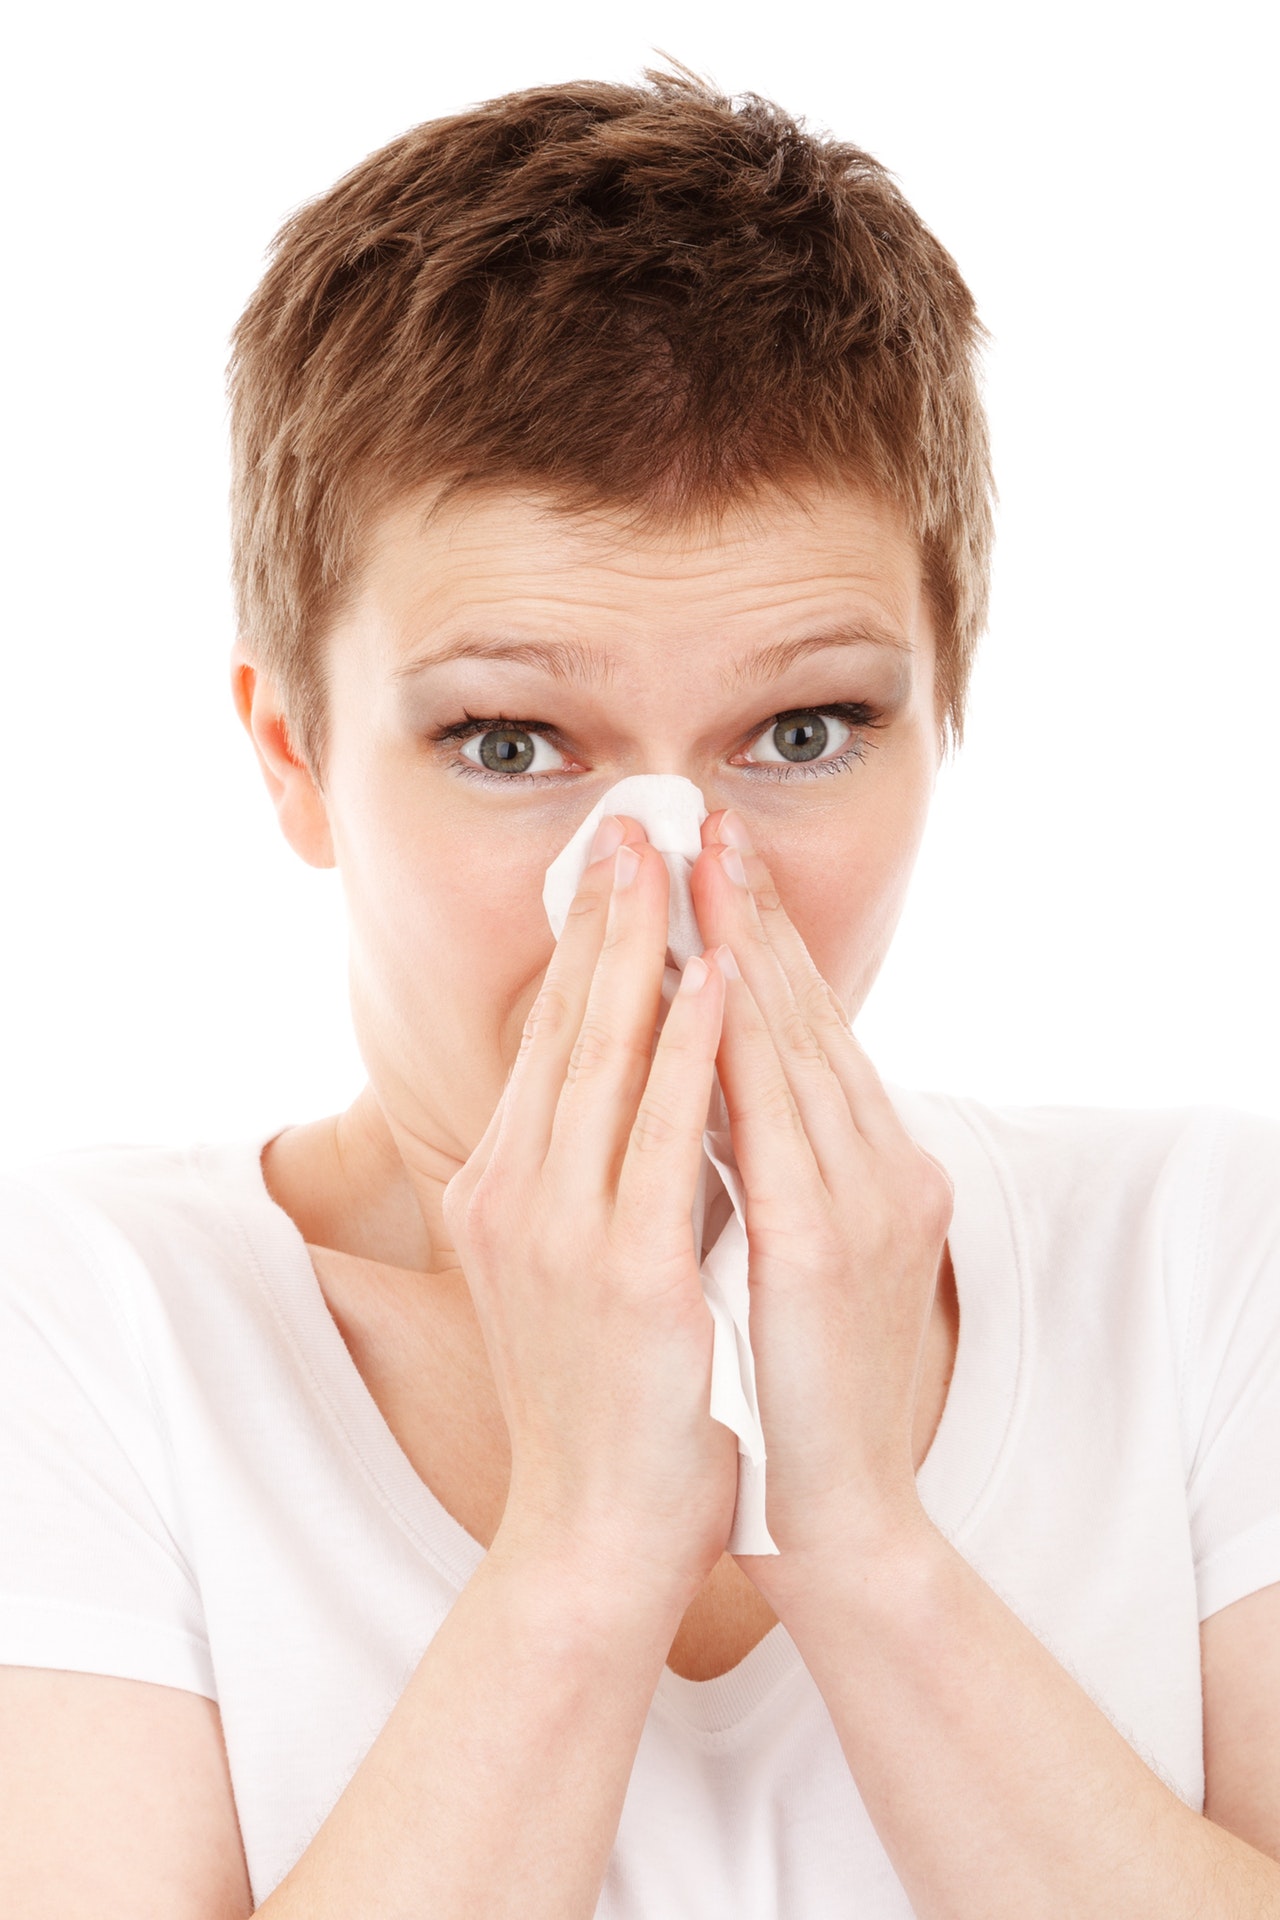 14 Secrets to Dealing with Allergies Naturally